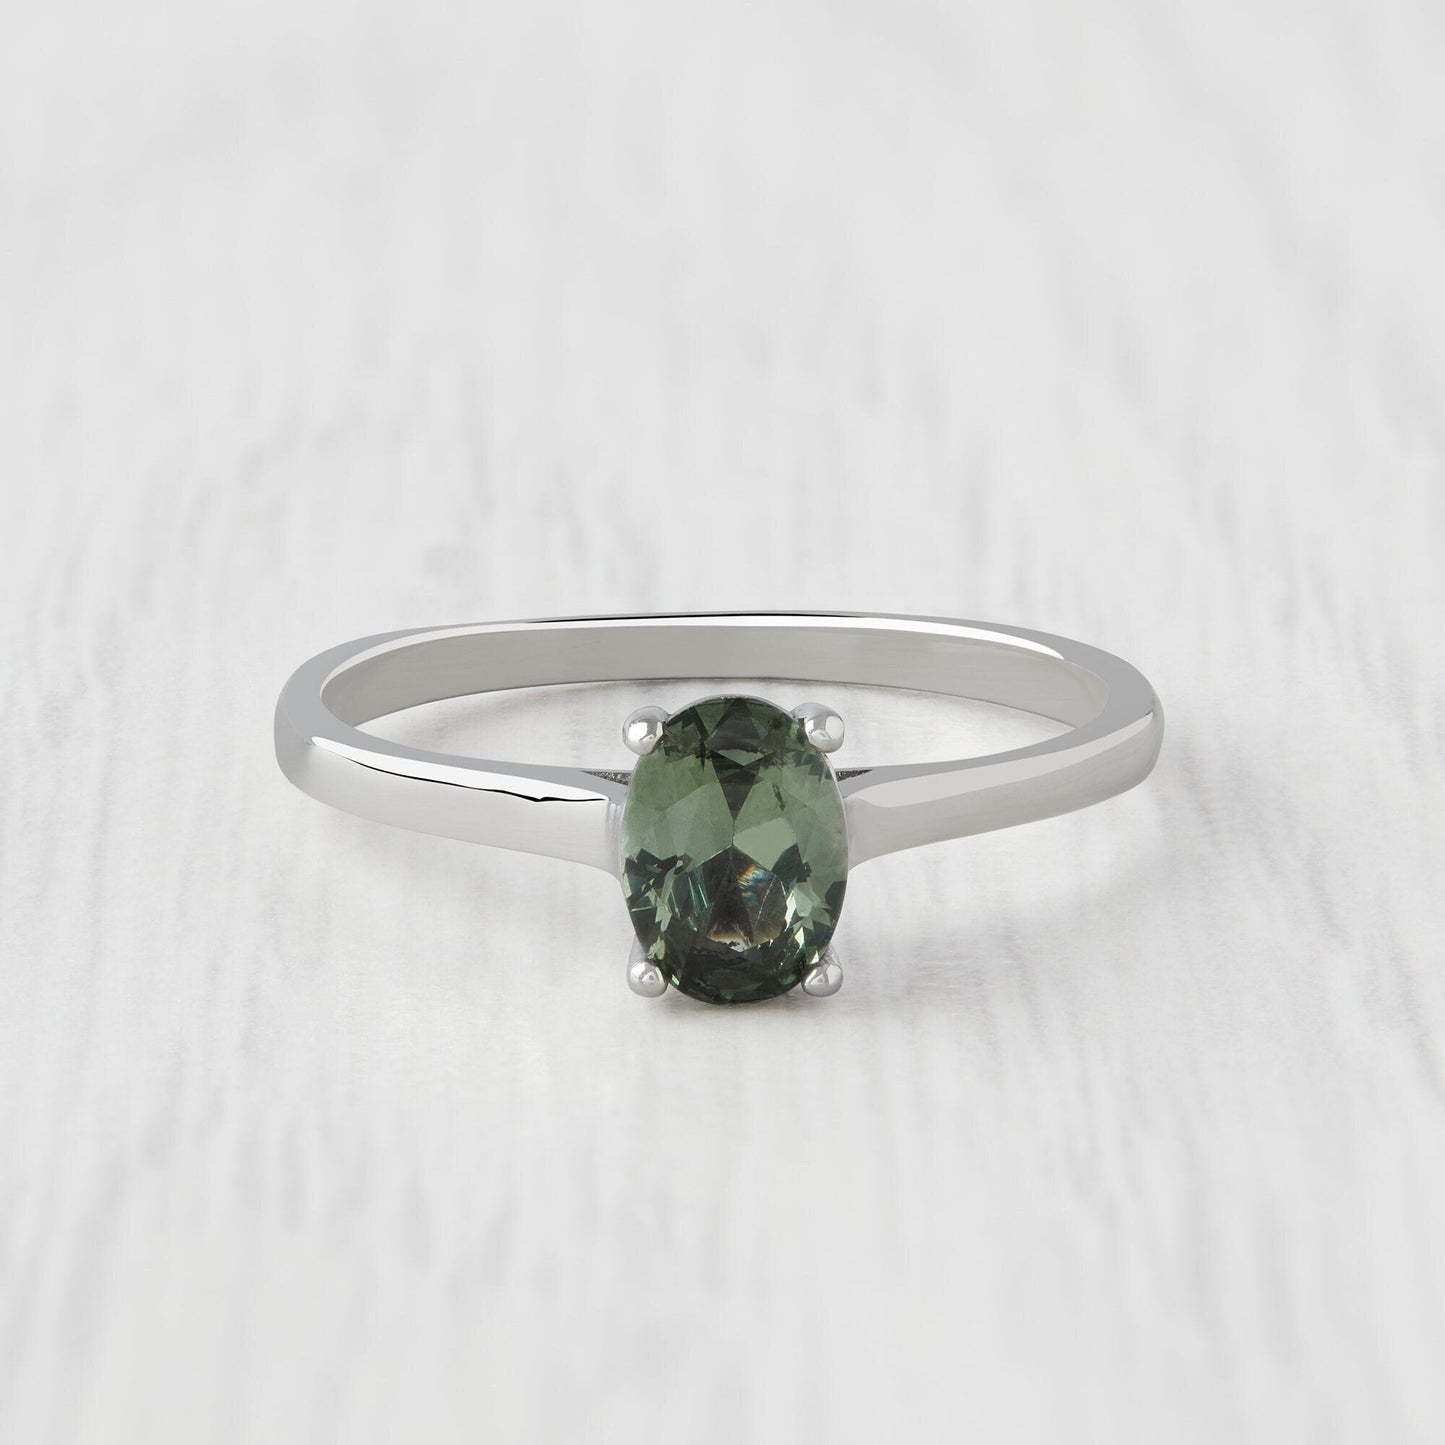 0.7ct Oval Cut Green Sapphire Solitaire cathedral ring in Titanium or White Gold